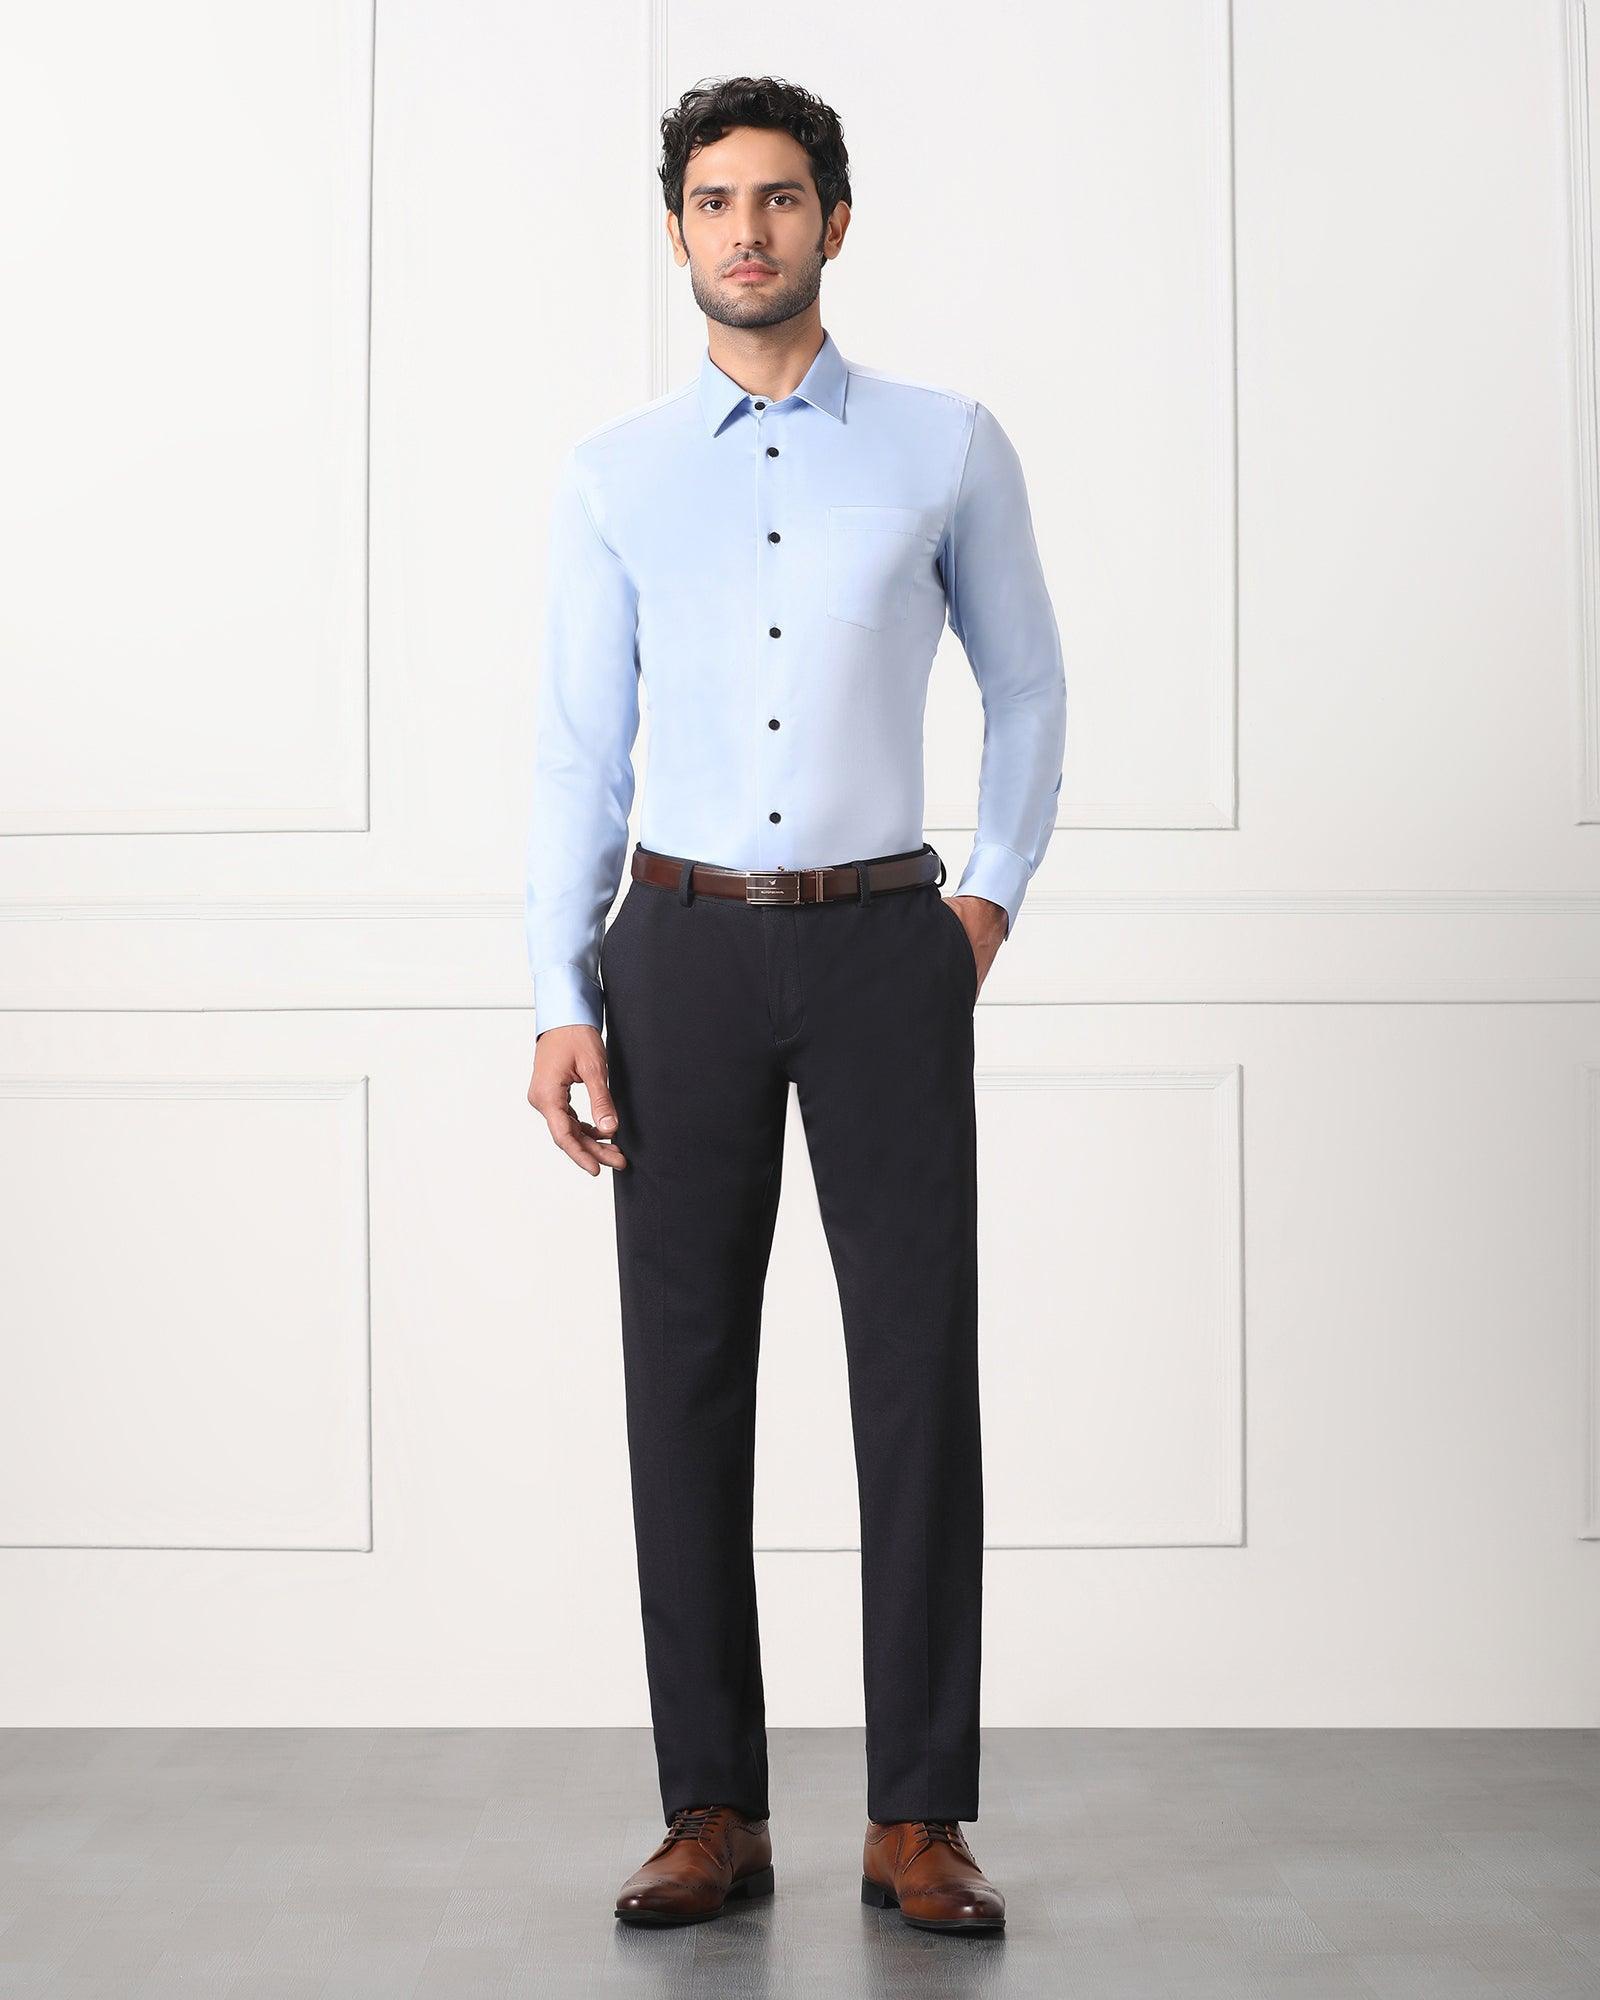 Men's grey dress pants, white shirt, patterned navy tie and brown monk  strap shoes outfit | Grey pants brown shoes, Grey pants outfit, Grey dress  pants